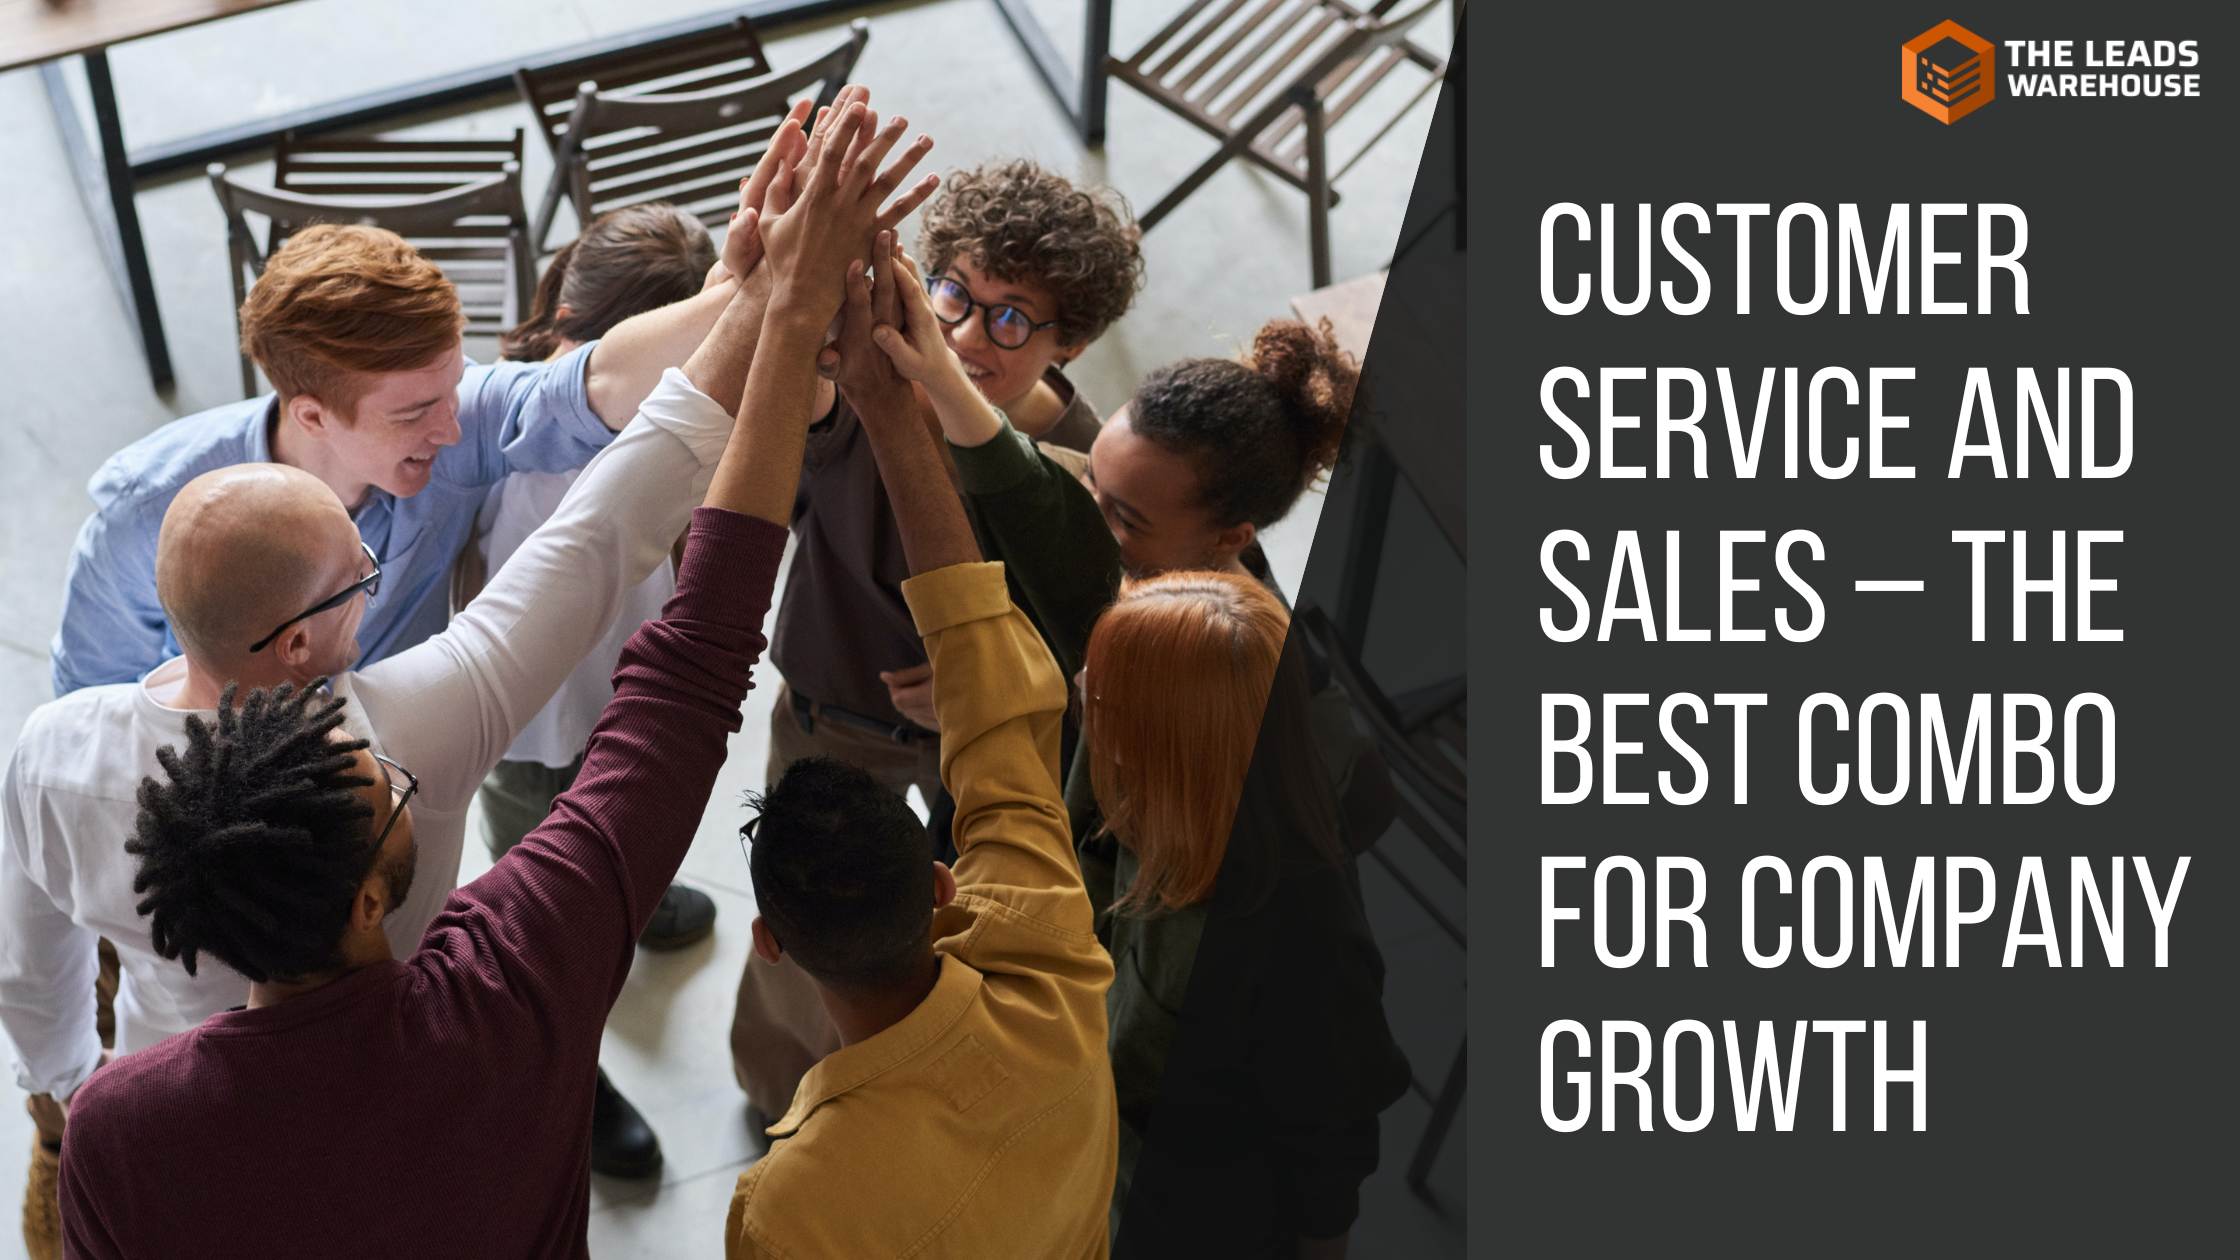 Customer Service and Sales - The Best Combo for Company Growth?